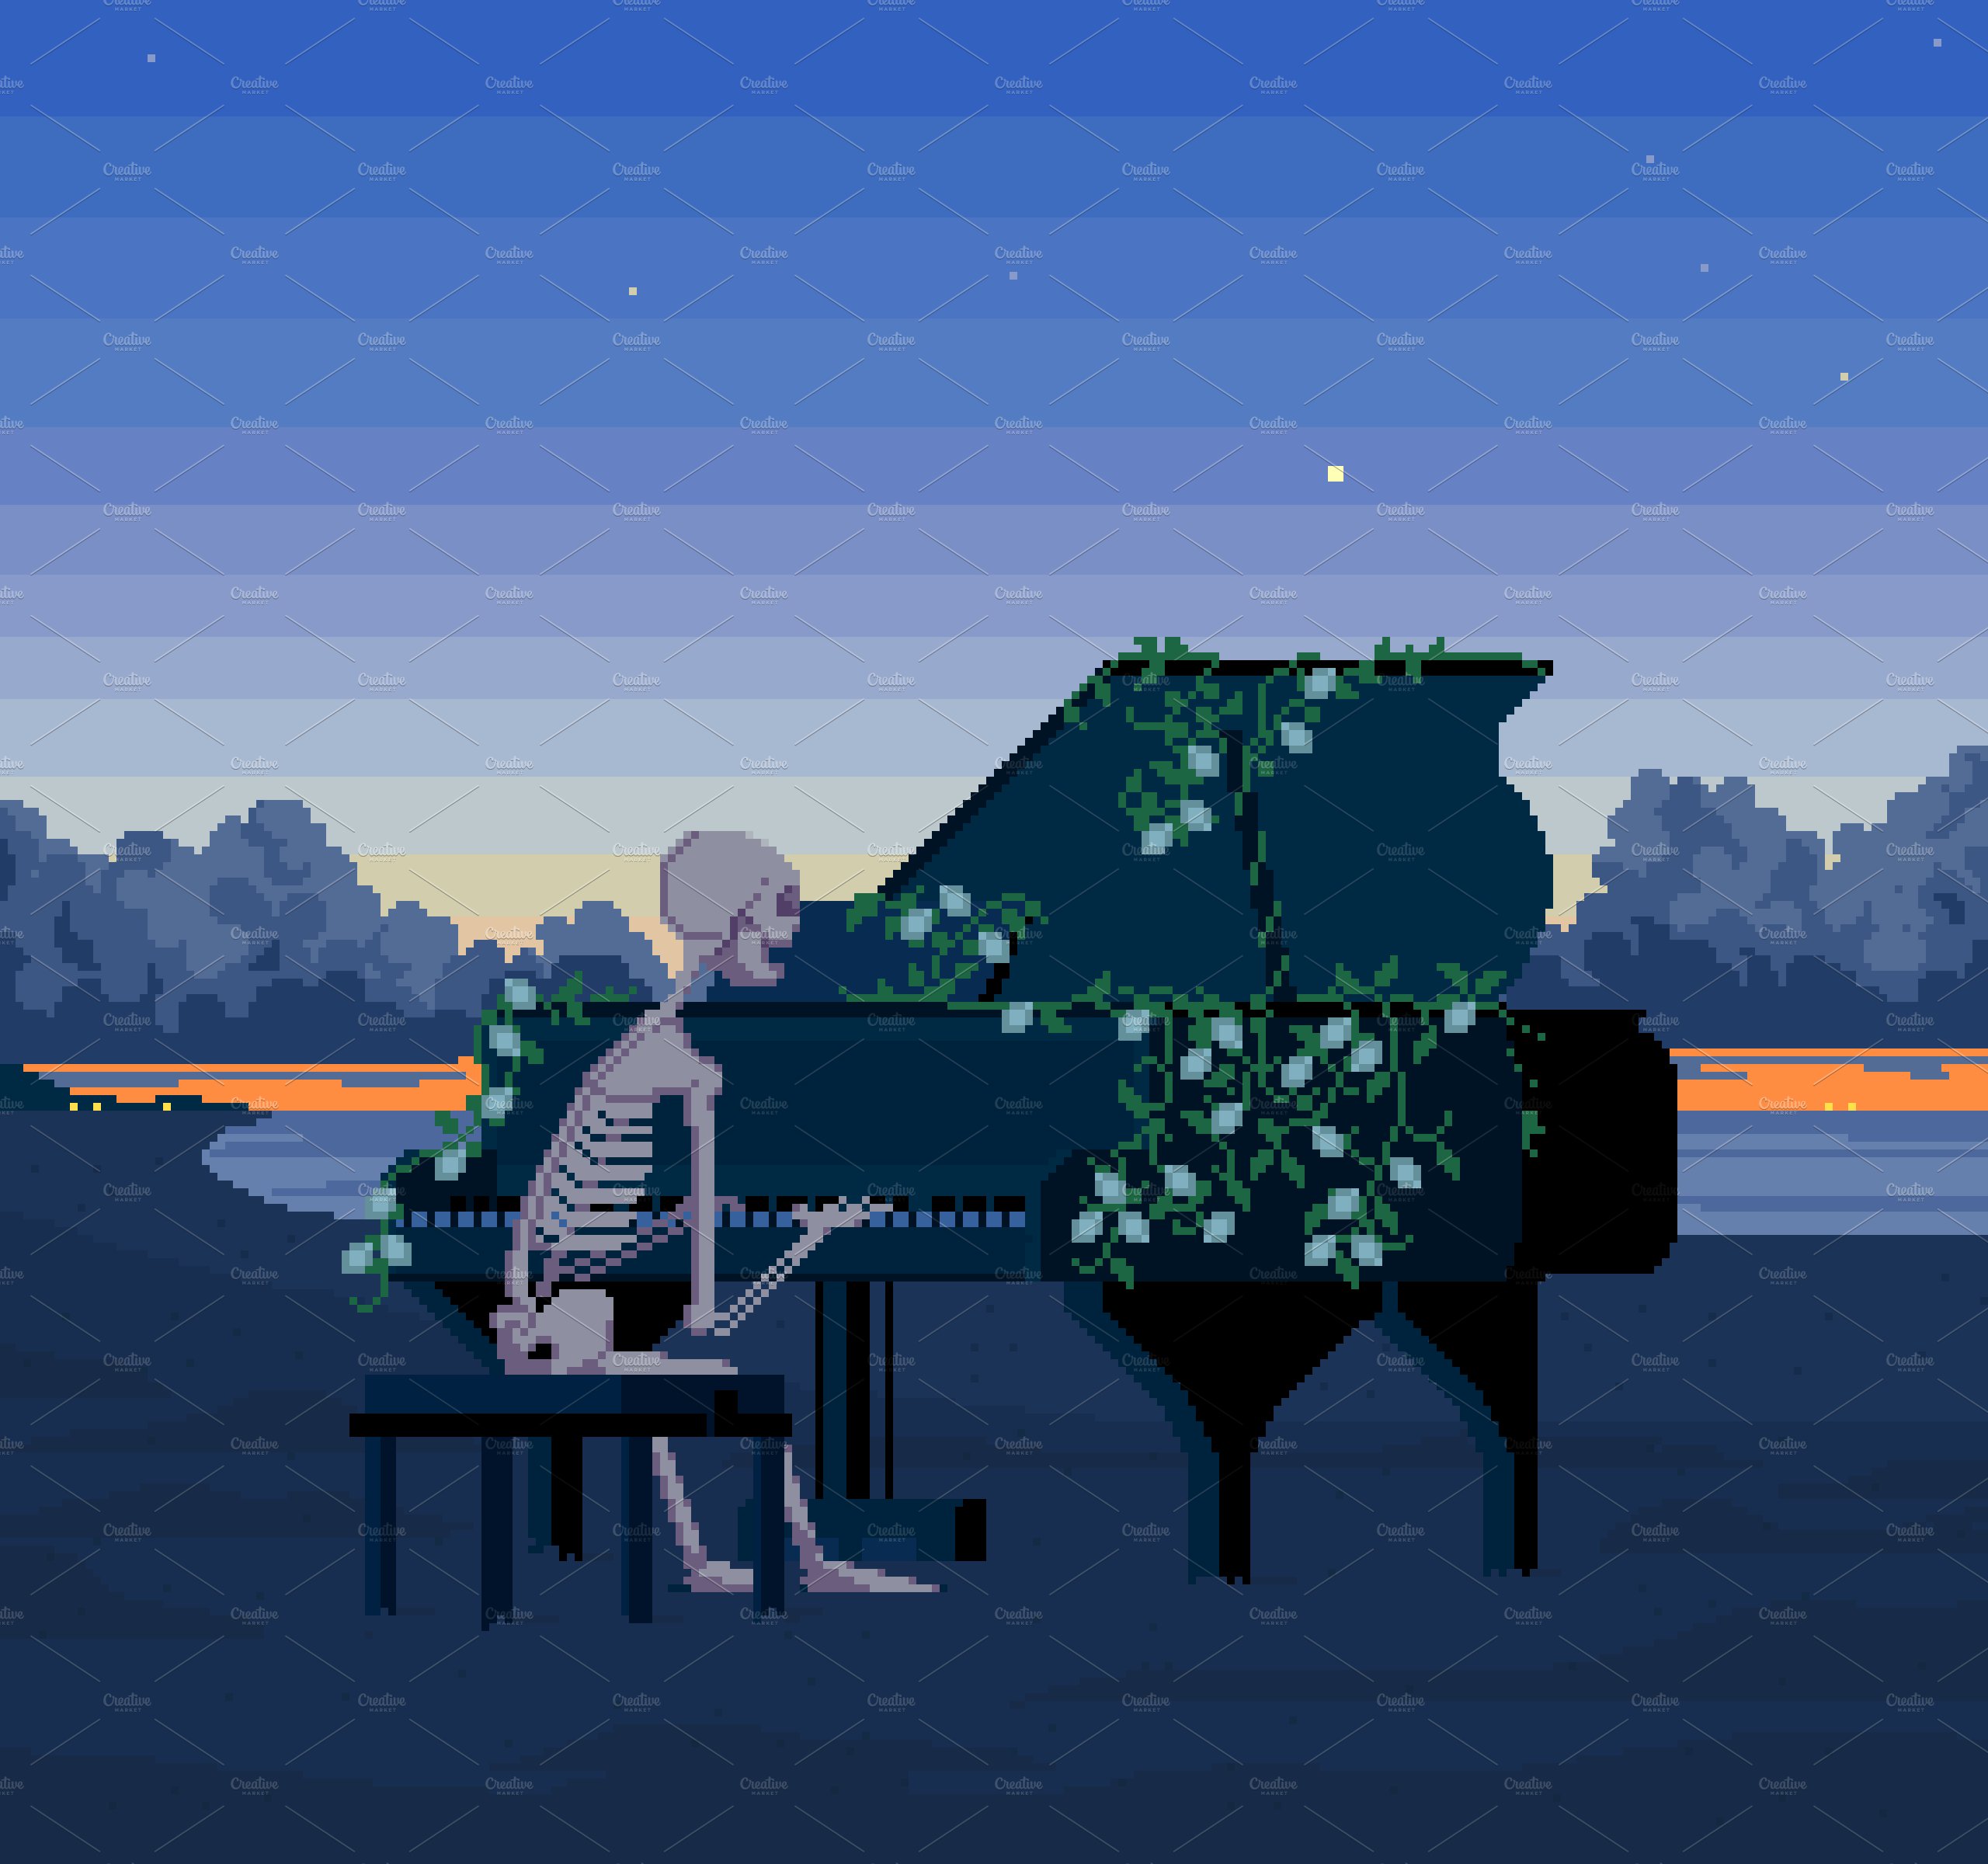 The Skinny Pianist preview image.